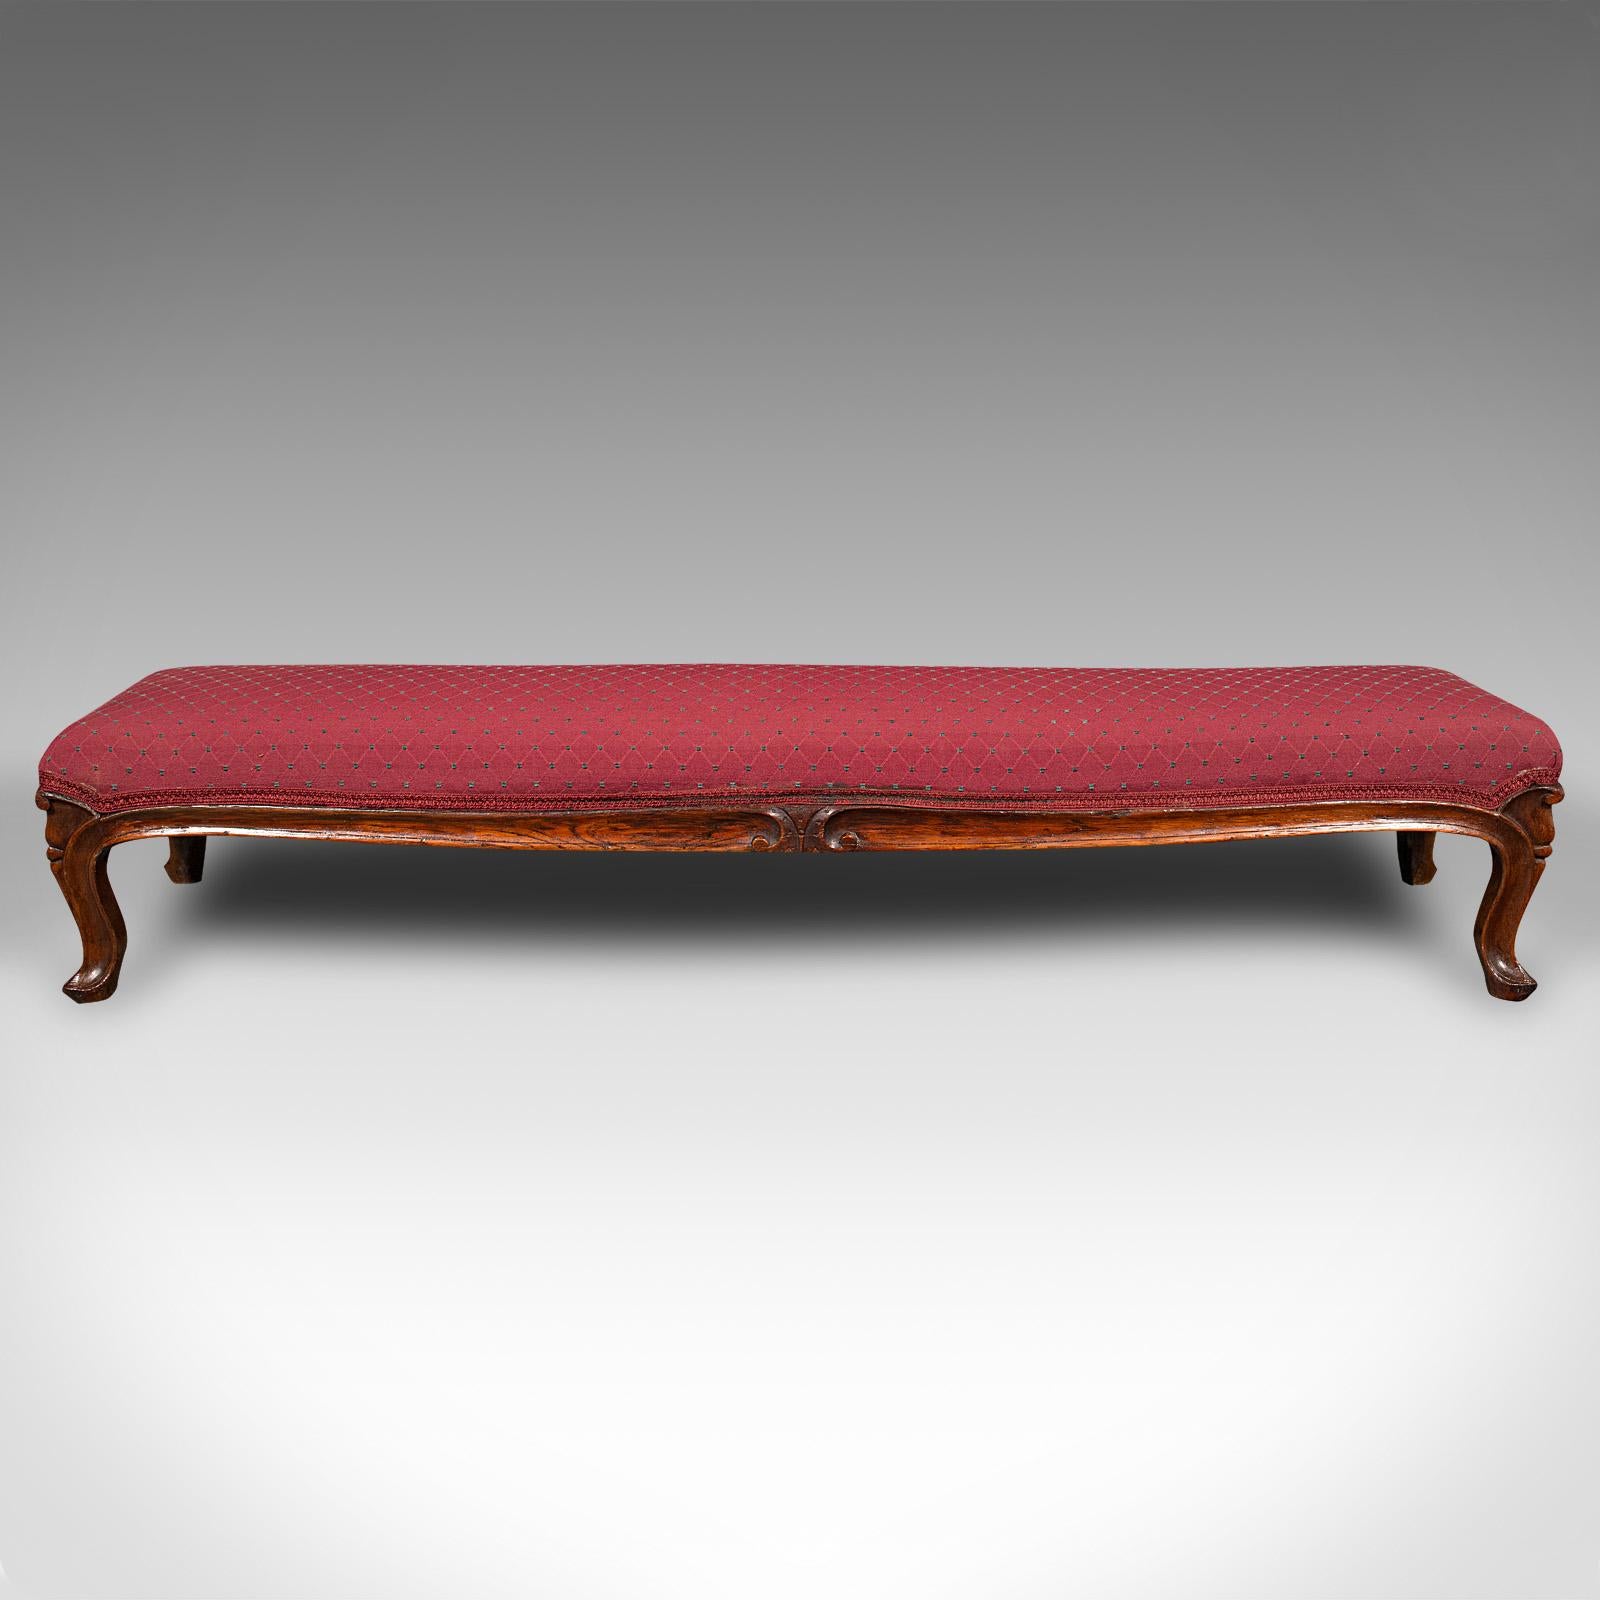 British Antique Carriage Stool, English, Walnut, Fireside Foot Rest, Victorian, C.1840 For Sale